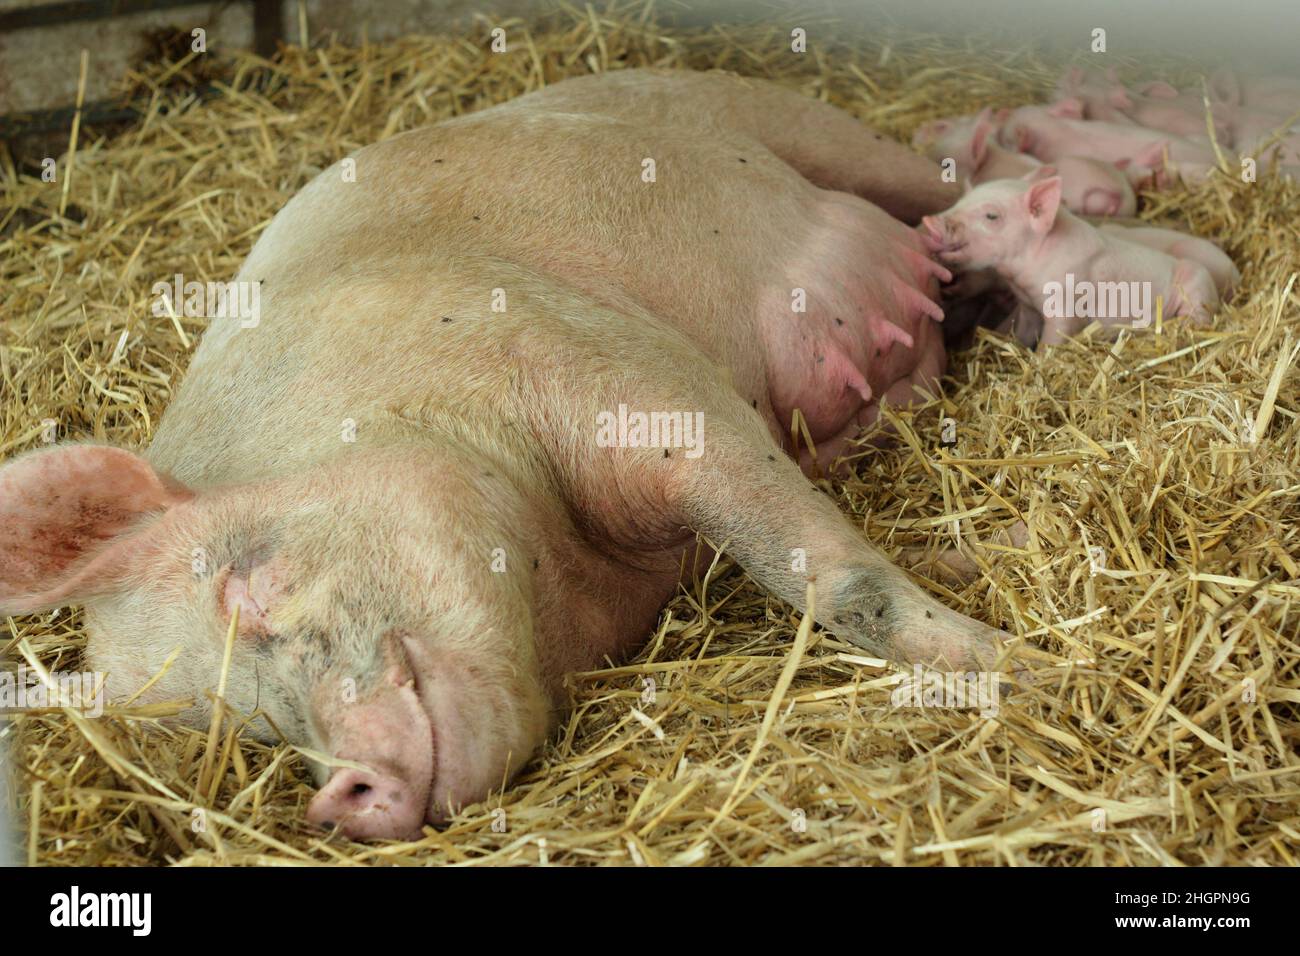 Sow and her piglets.  Litter of piglets feeding from their mother pig on a UK farm. Stock Photo